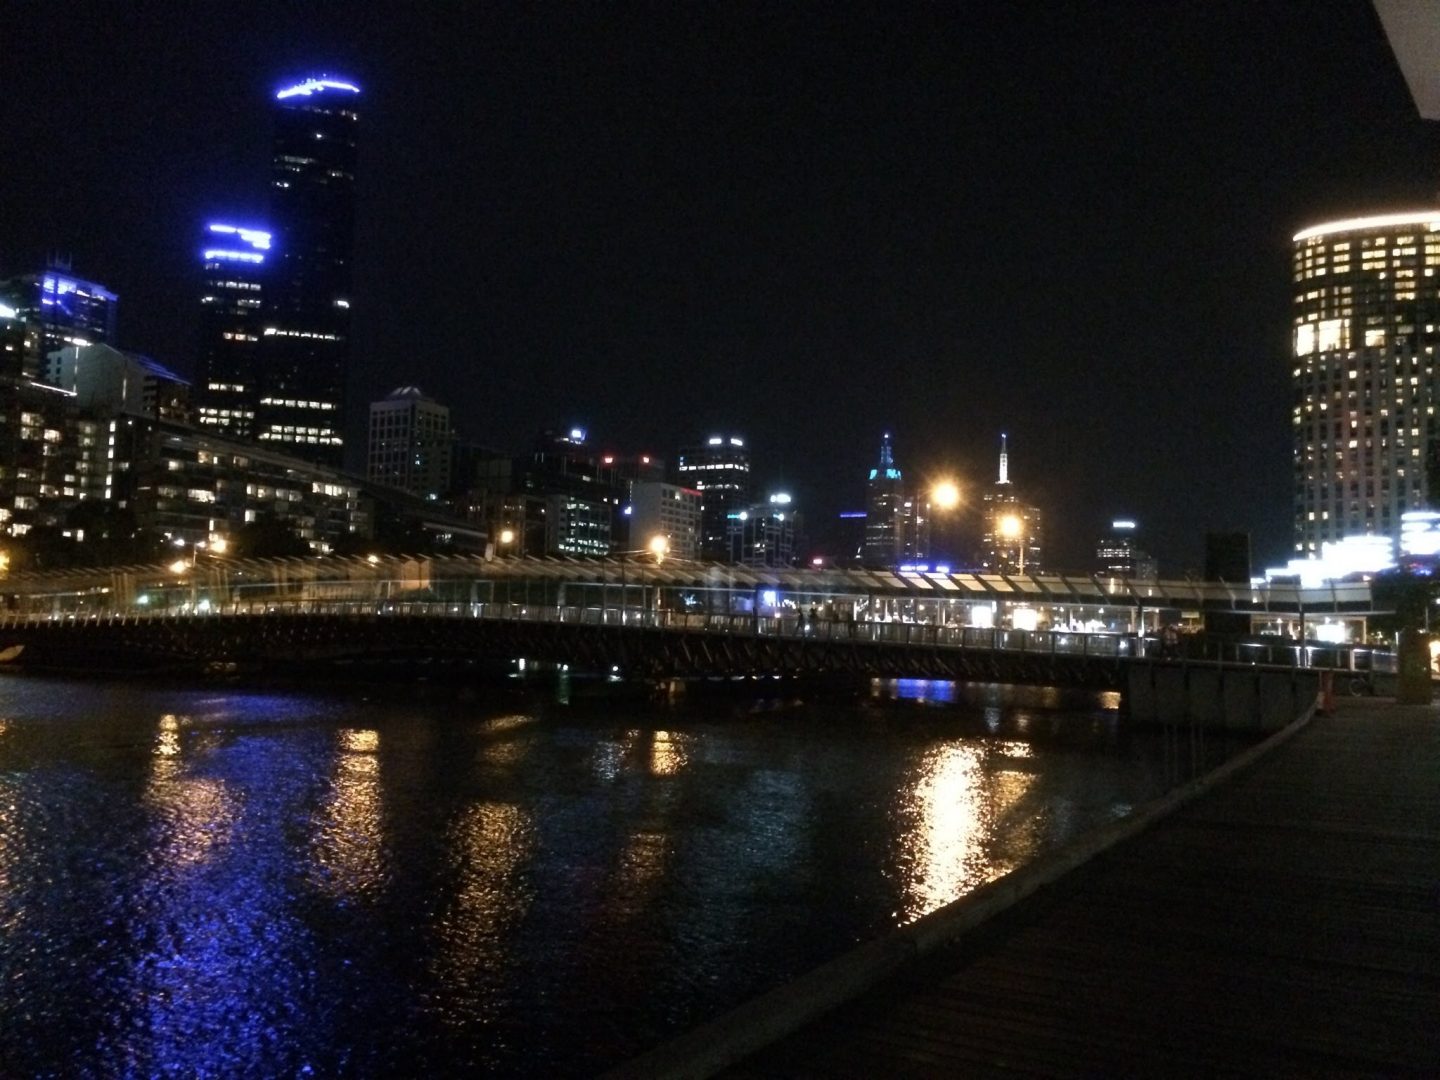 Melbourne's Yarra river by night